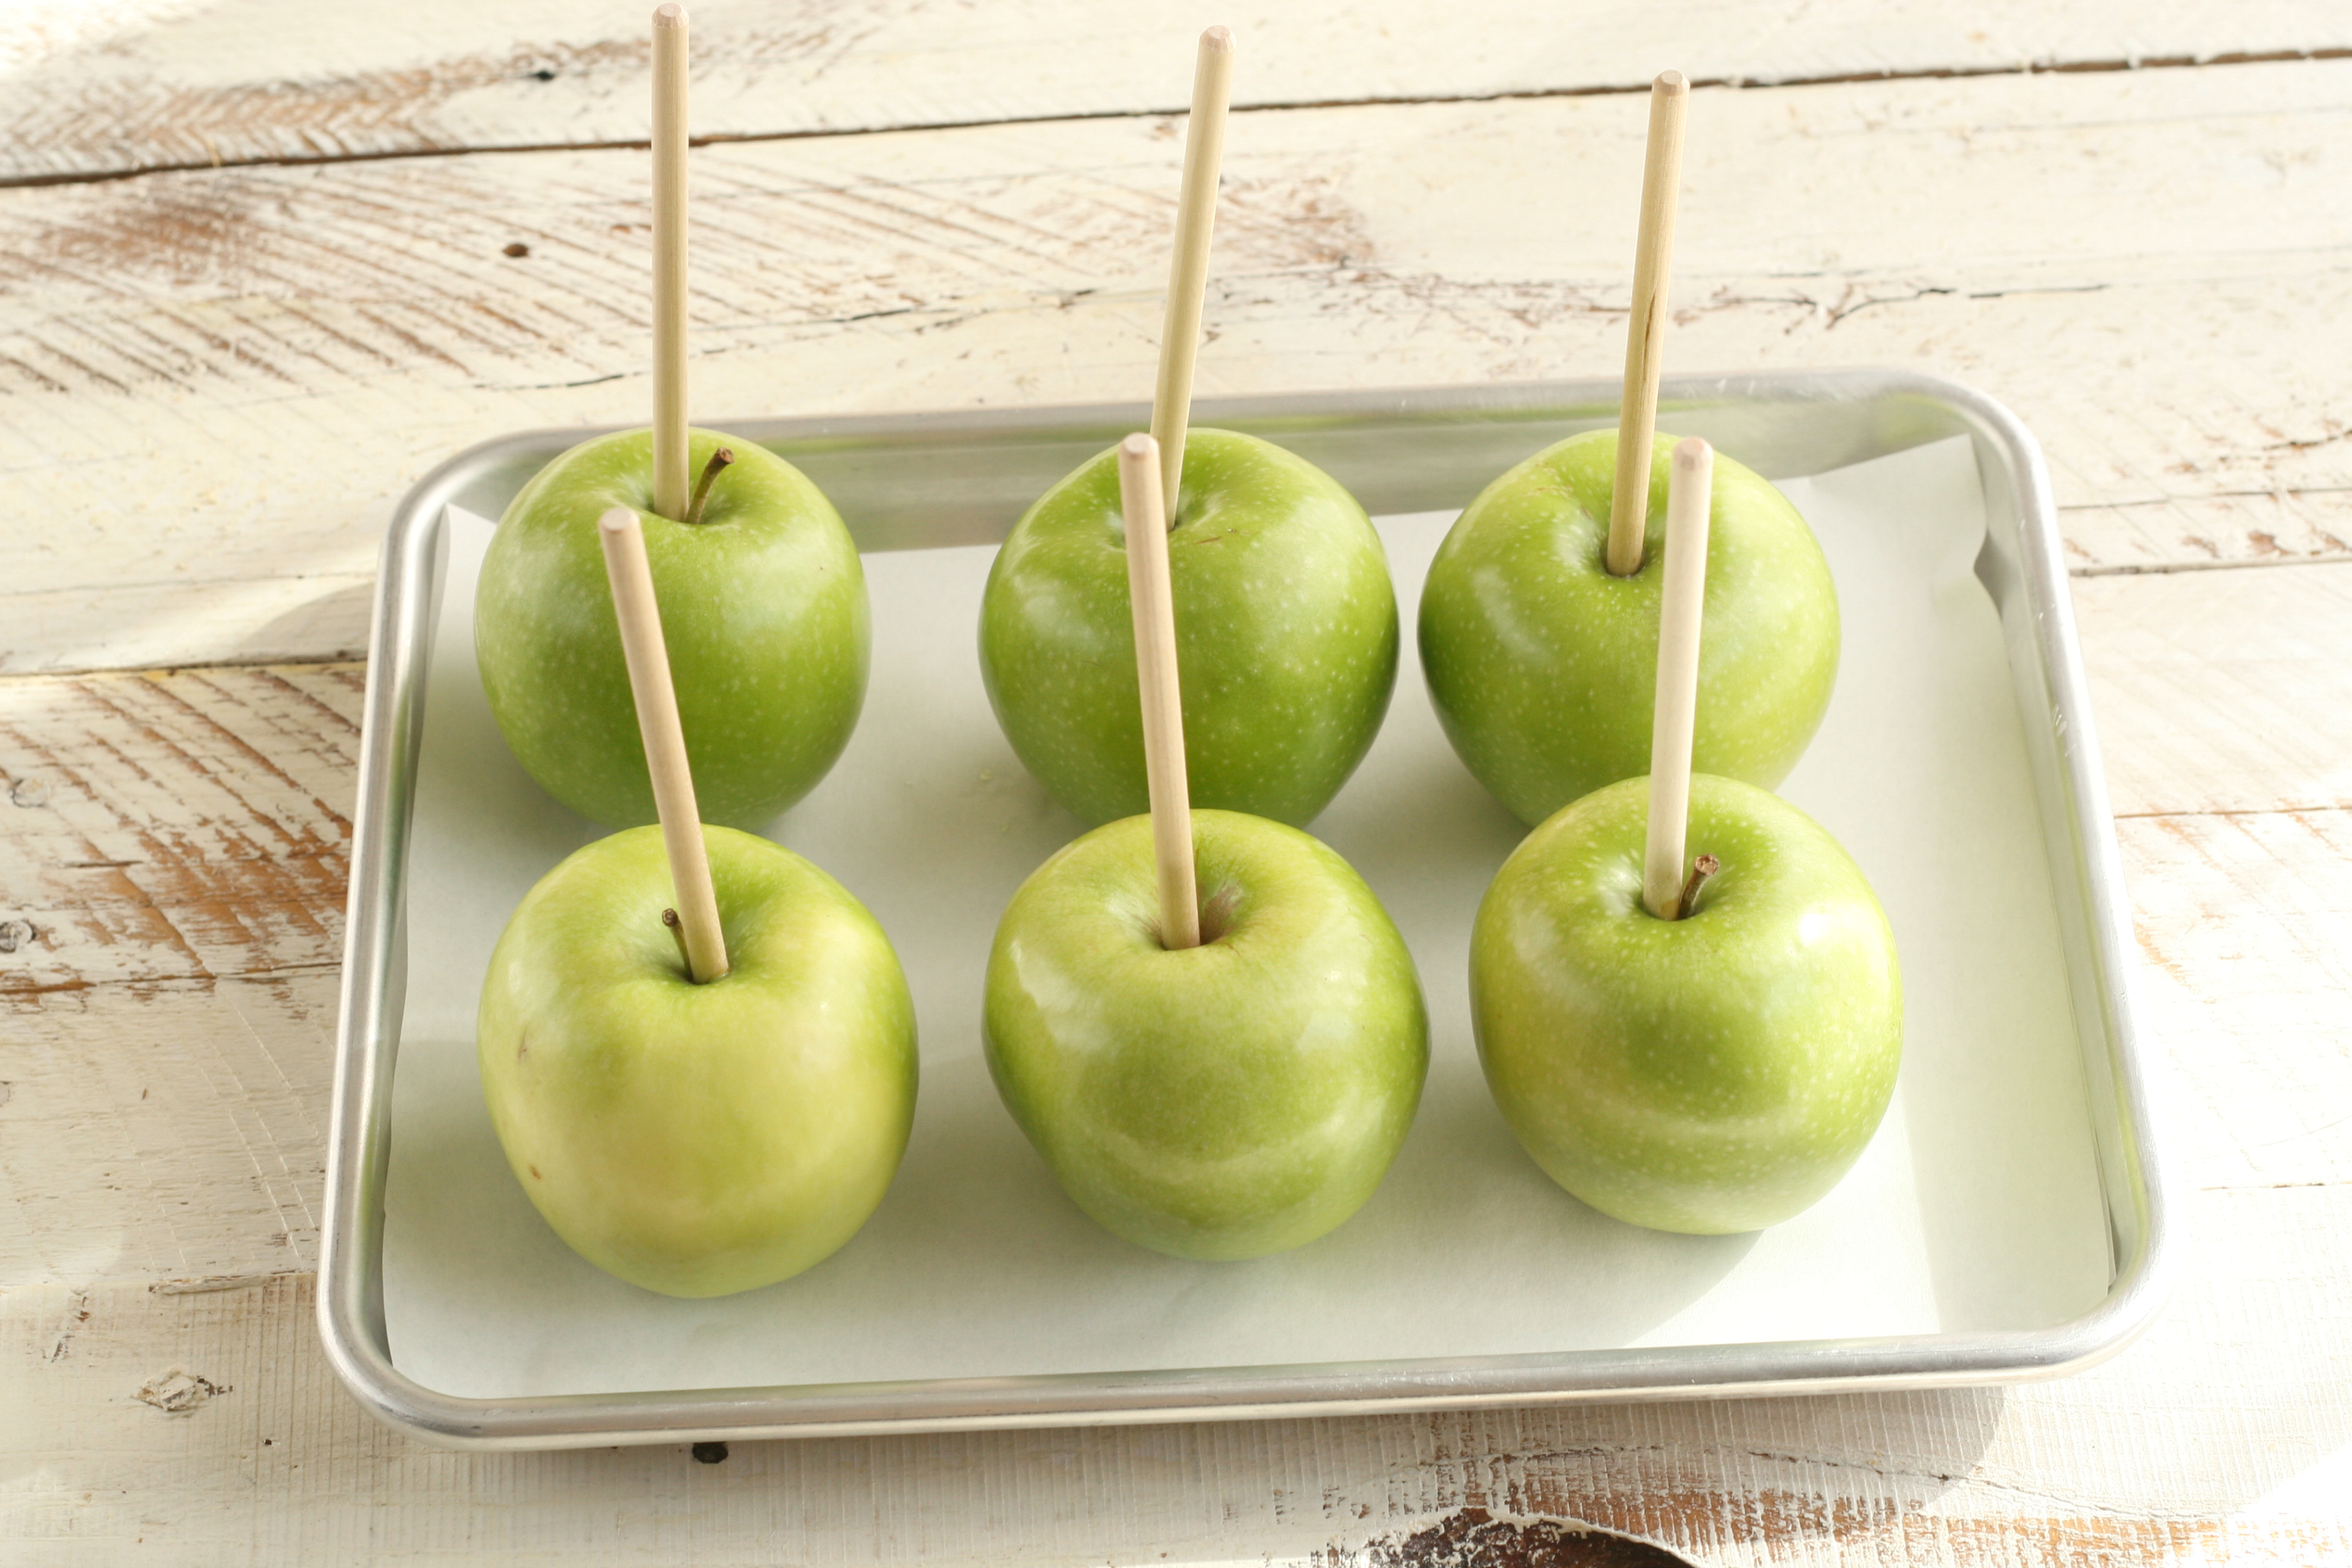 Granny Smith apples with wooden apple sticks sitting on a half sheet pan waiting to be dipped into melted caramel.